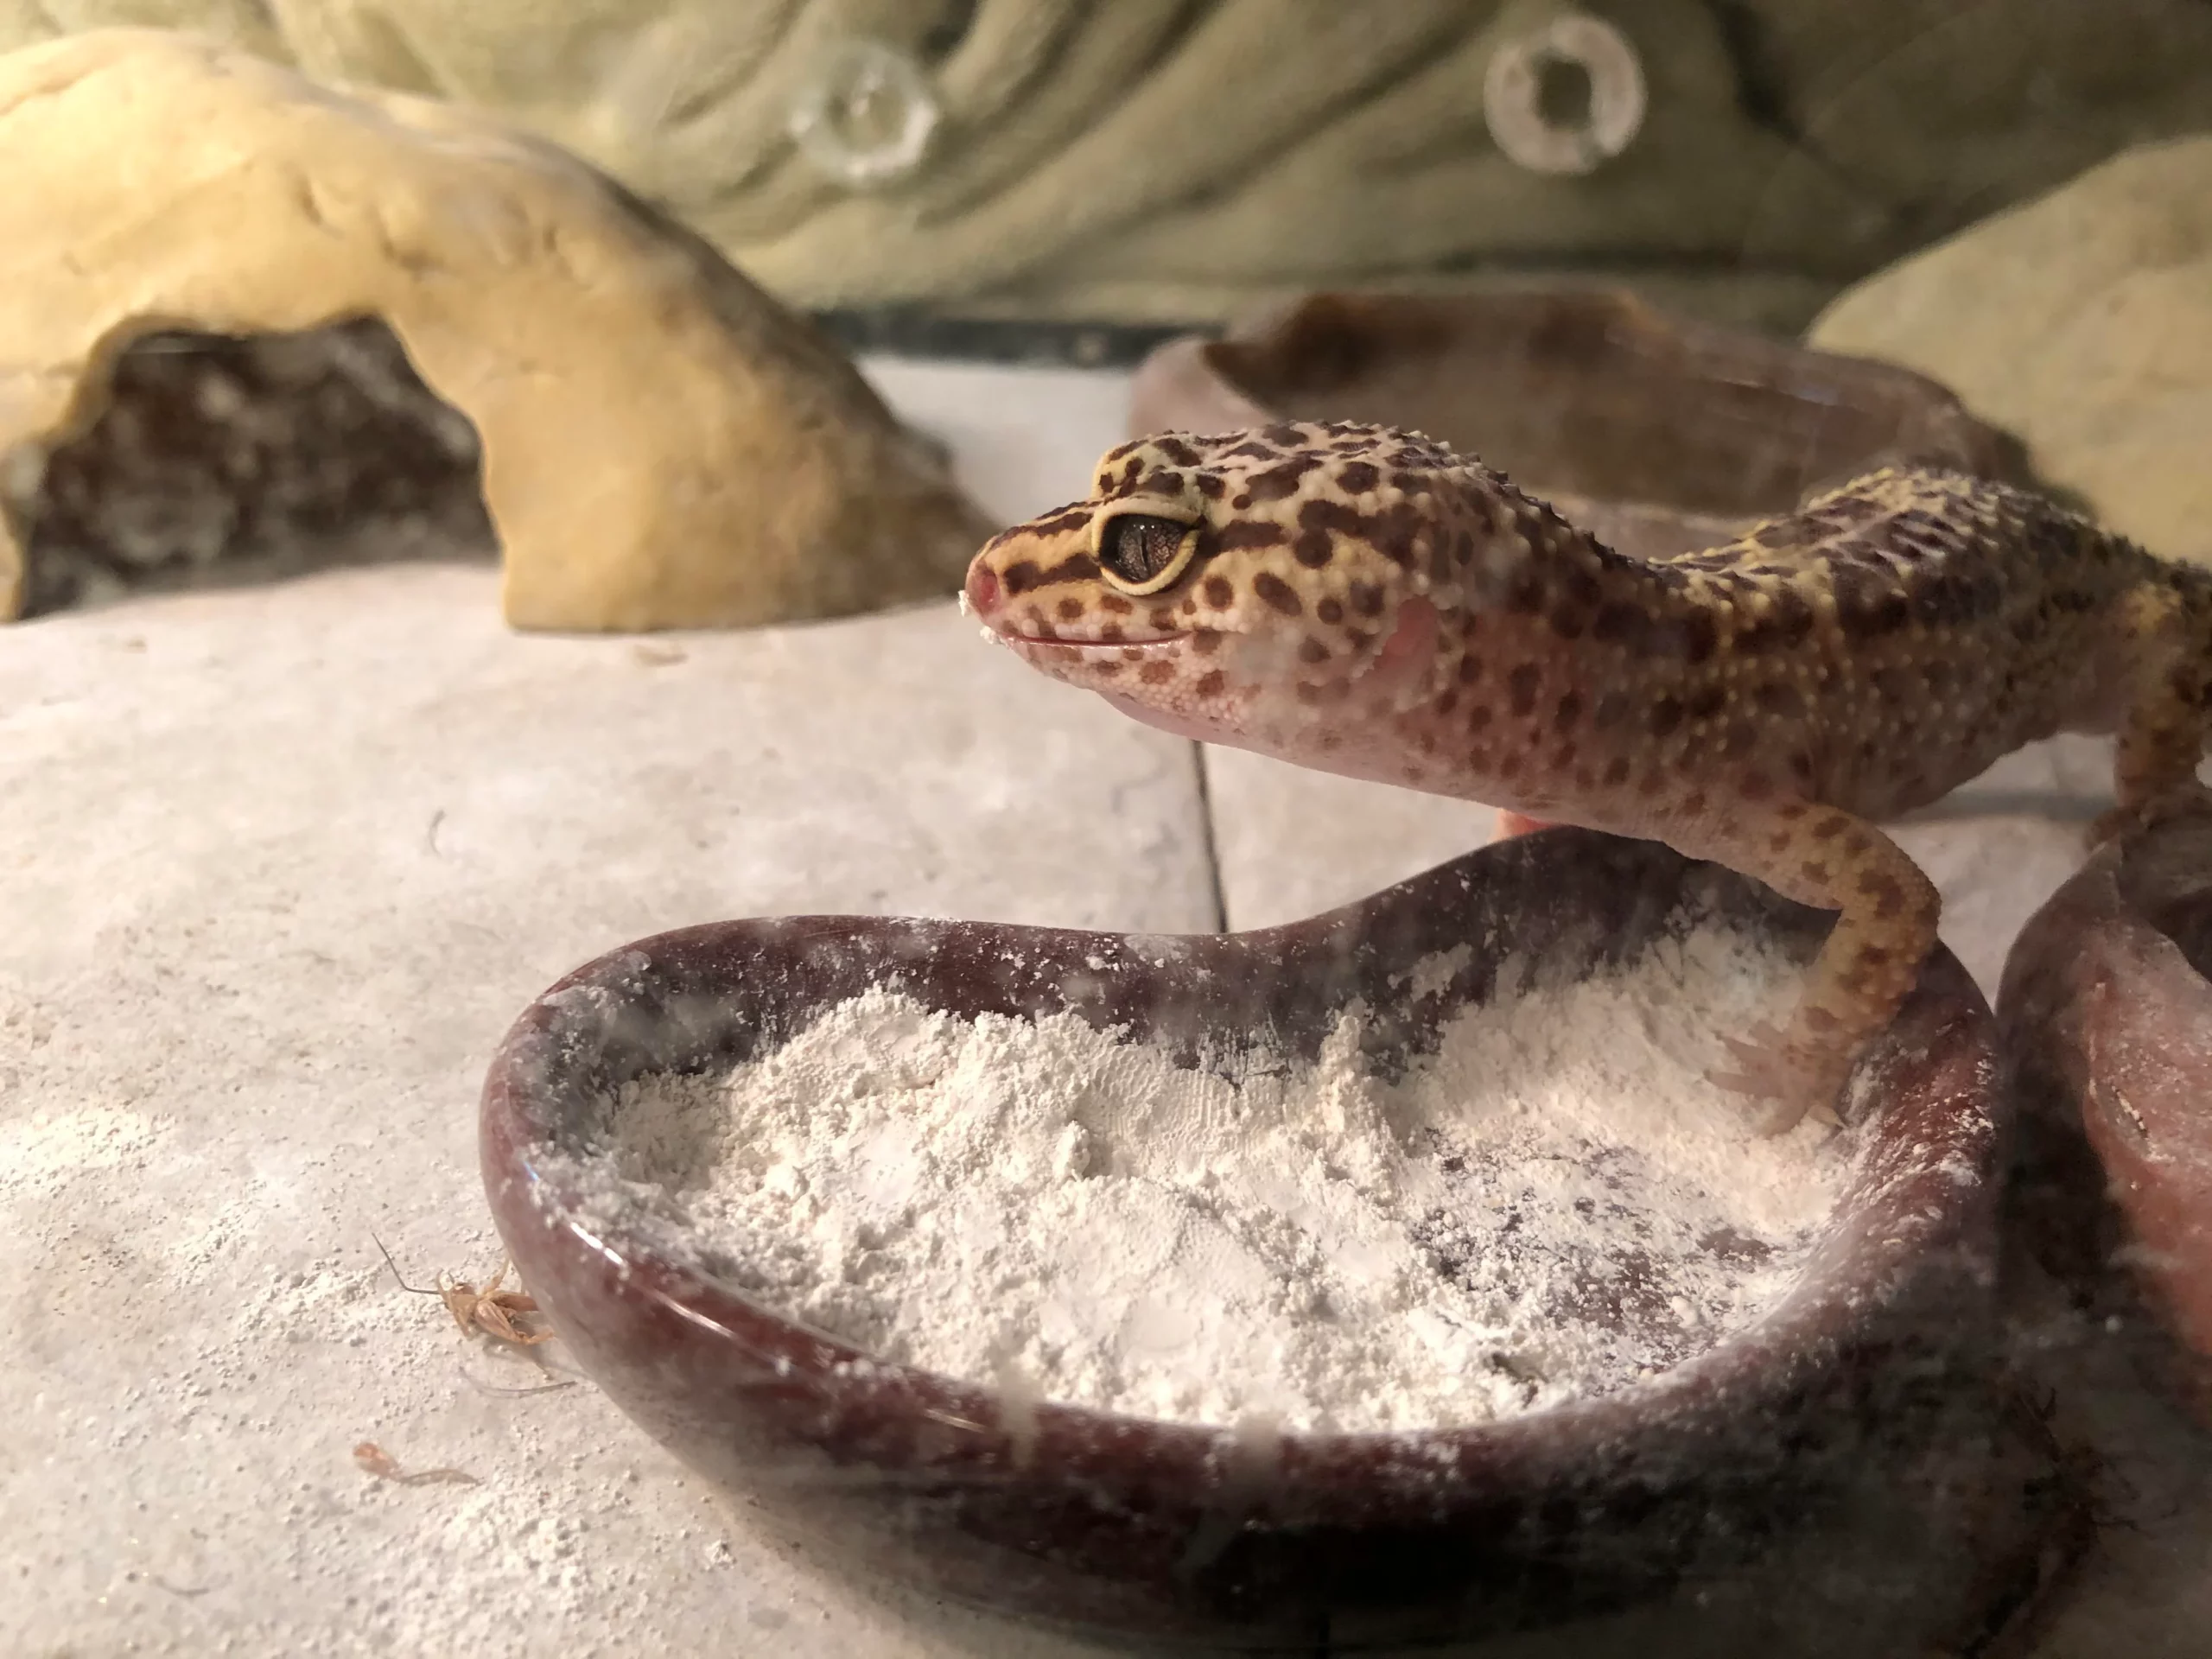 How Often Should I Feed My Leopard Gecko Calcium